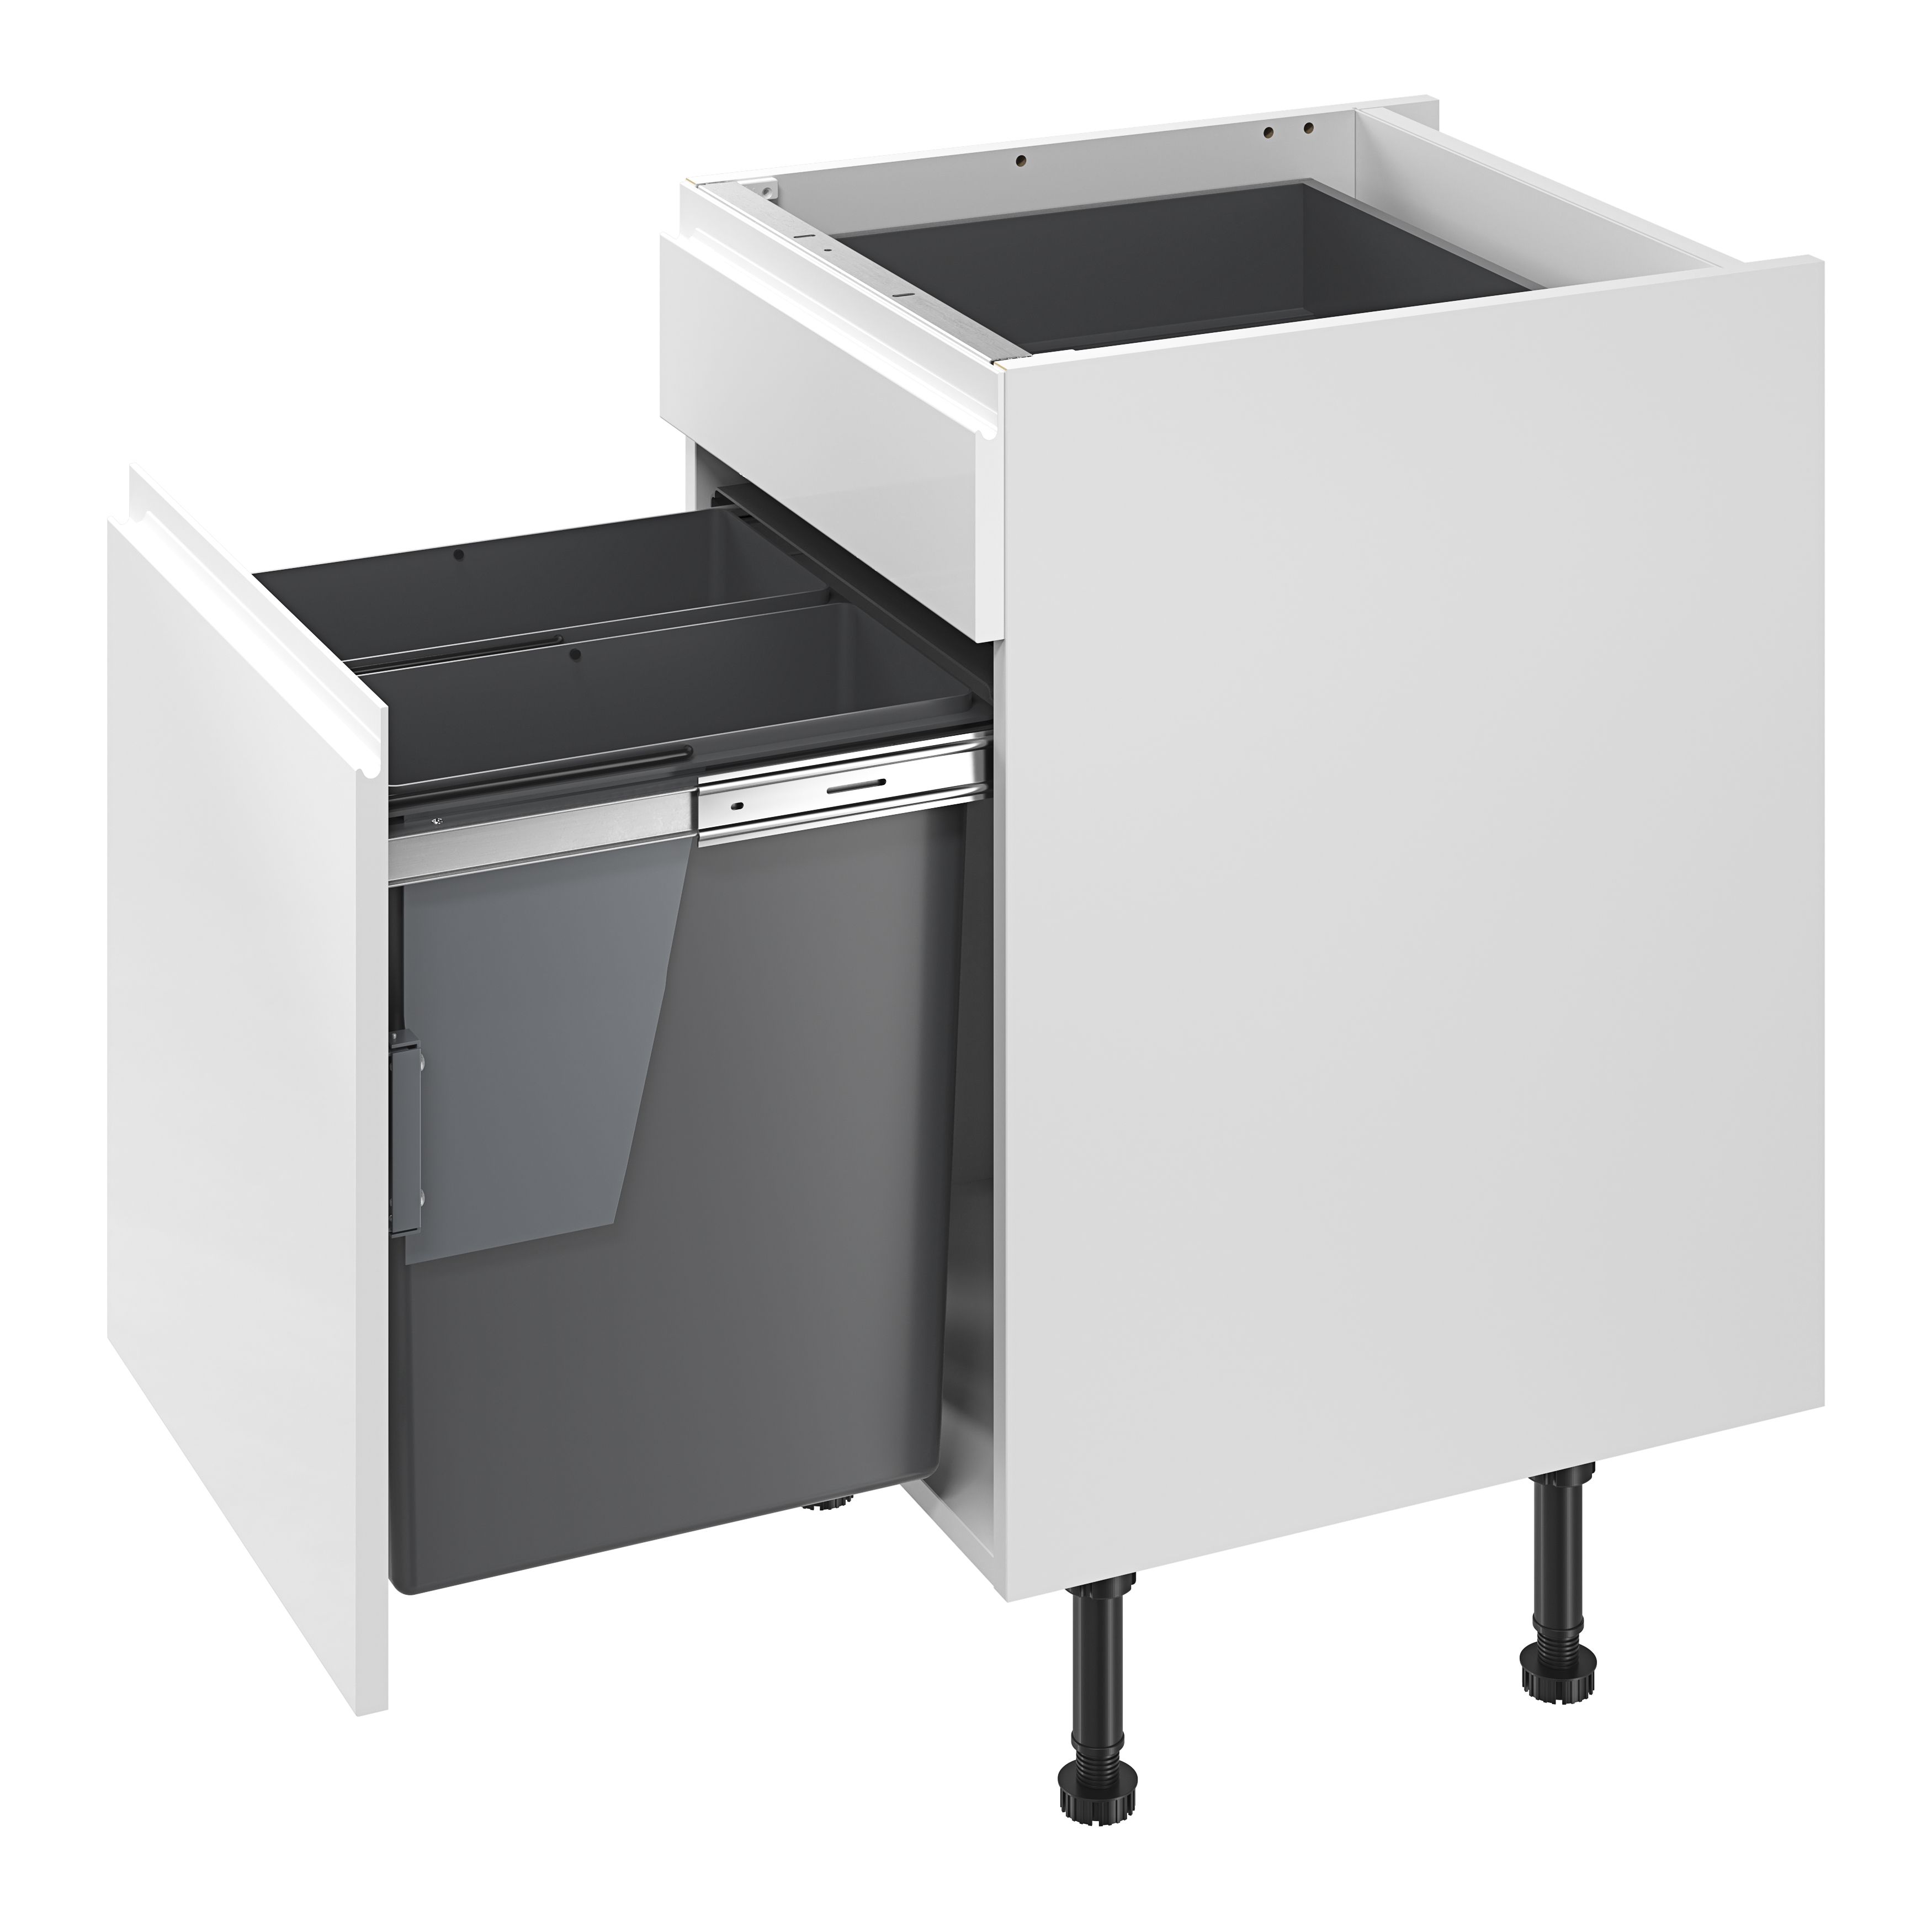 GoodHome Vigote Anthracite Silver effect Integrated Kitchen Pull-out bin, - 58L